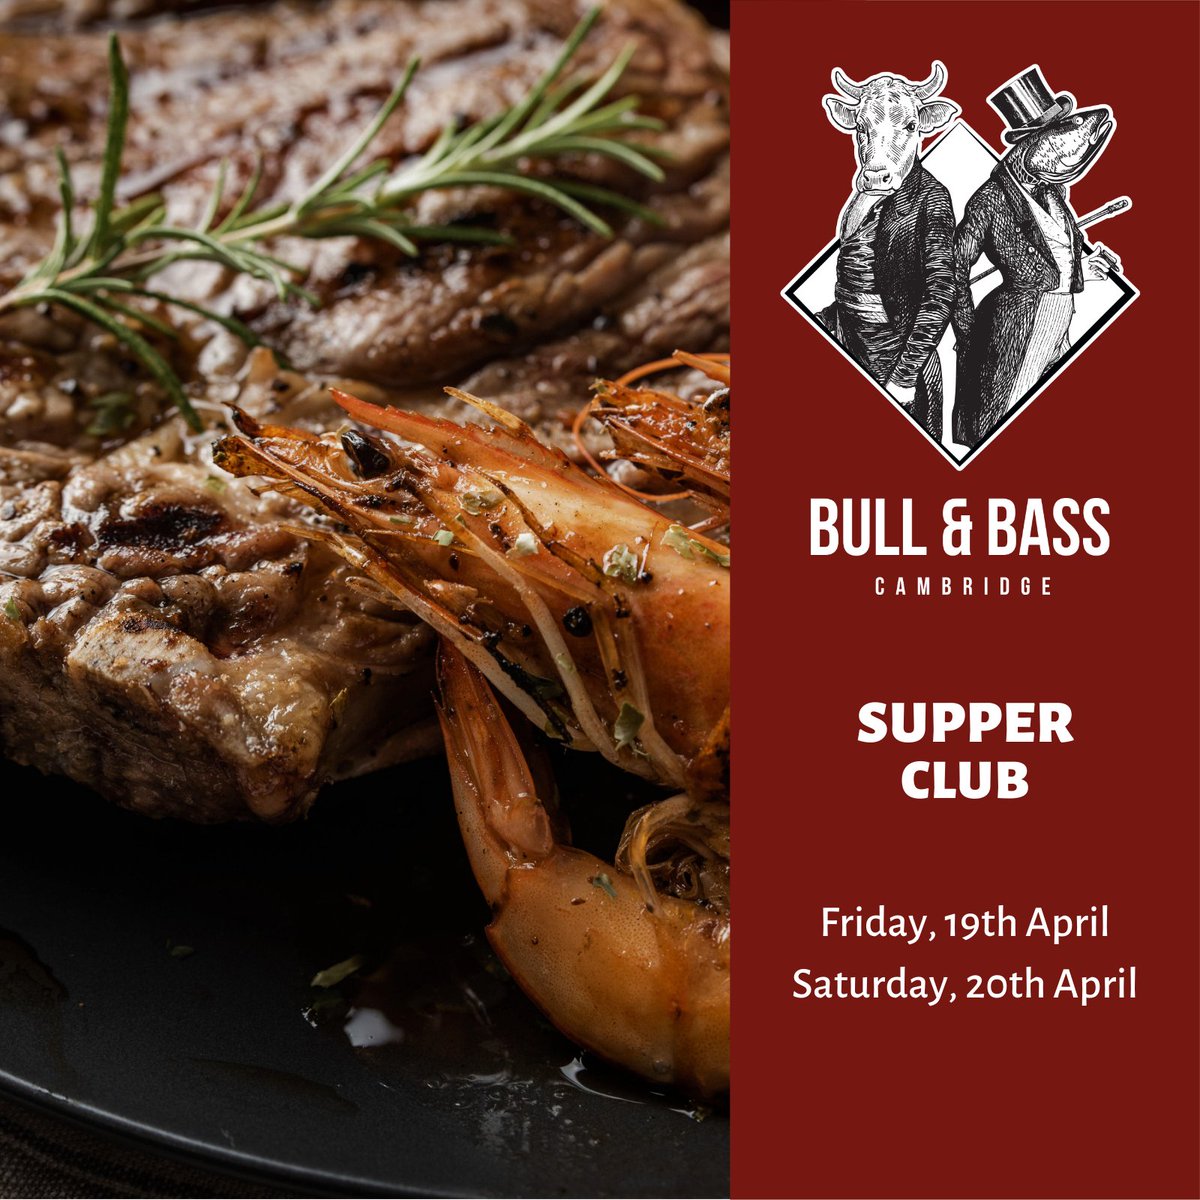 Join the Surf & Turf Supper Club! On Fri/Sat, April 19-20 inside Bull & Bass Restaurant in Cambridge City Centre. Click to view the menu and reserve your table now! hil.tn/0jlaav